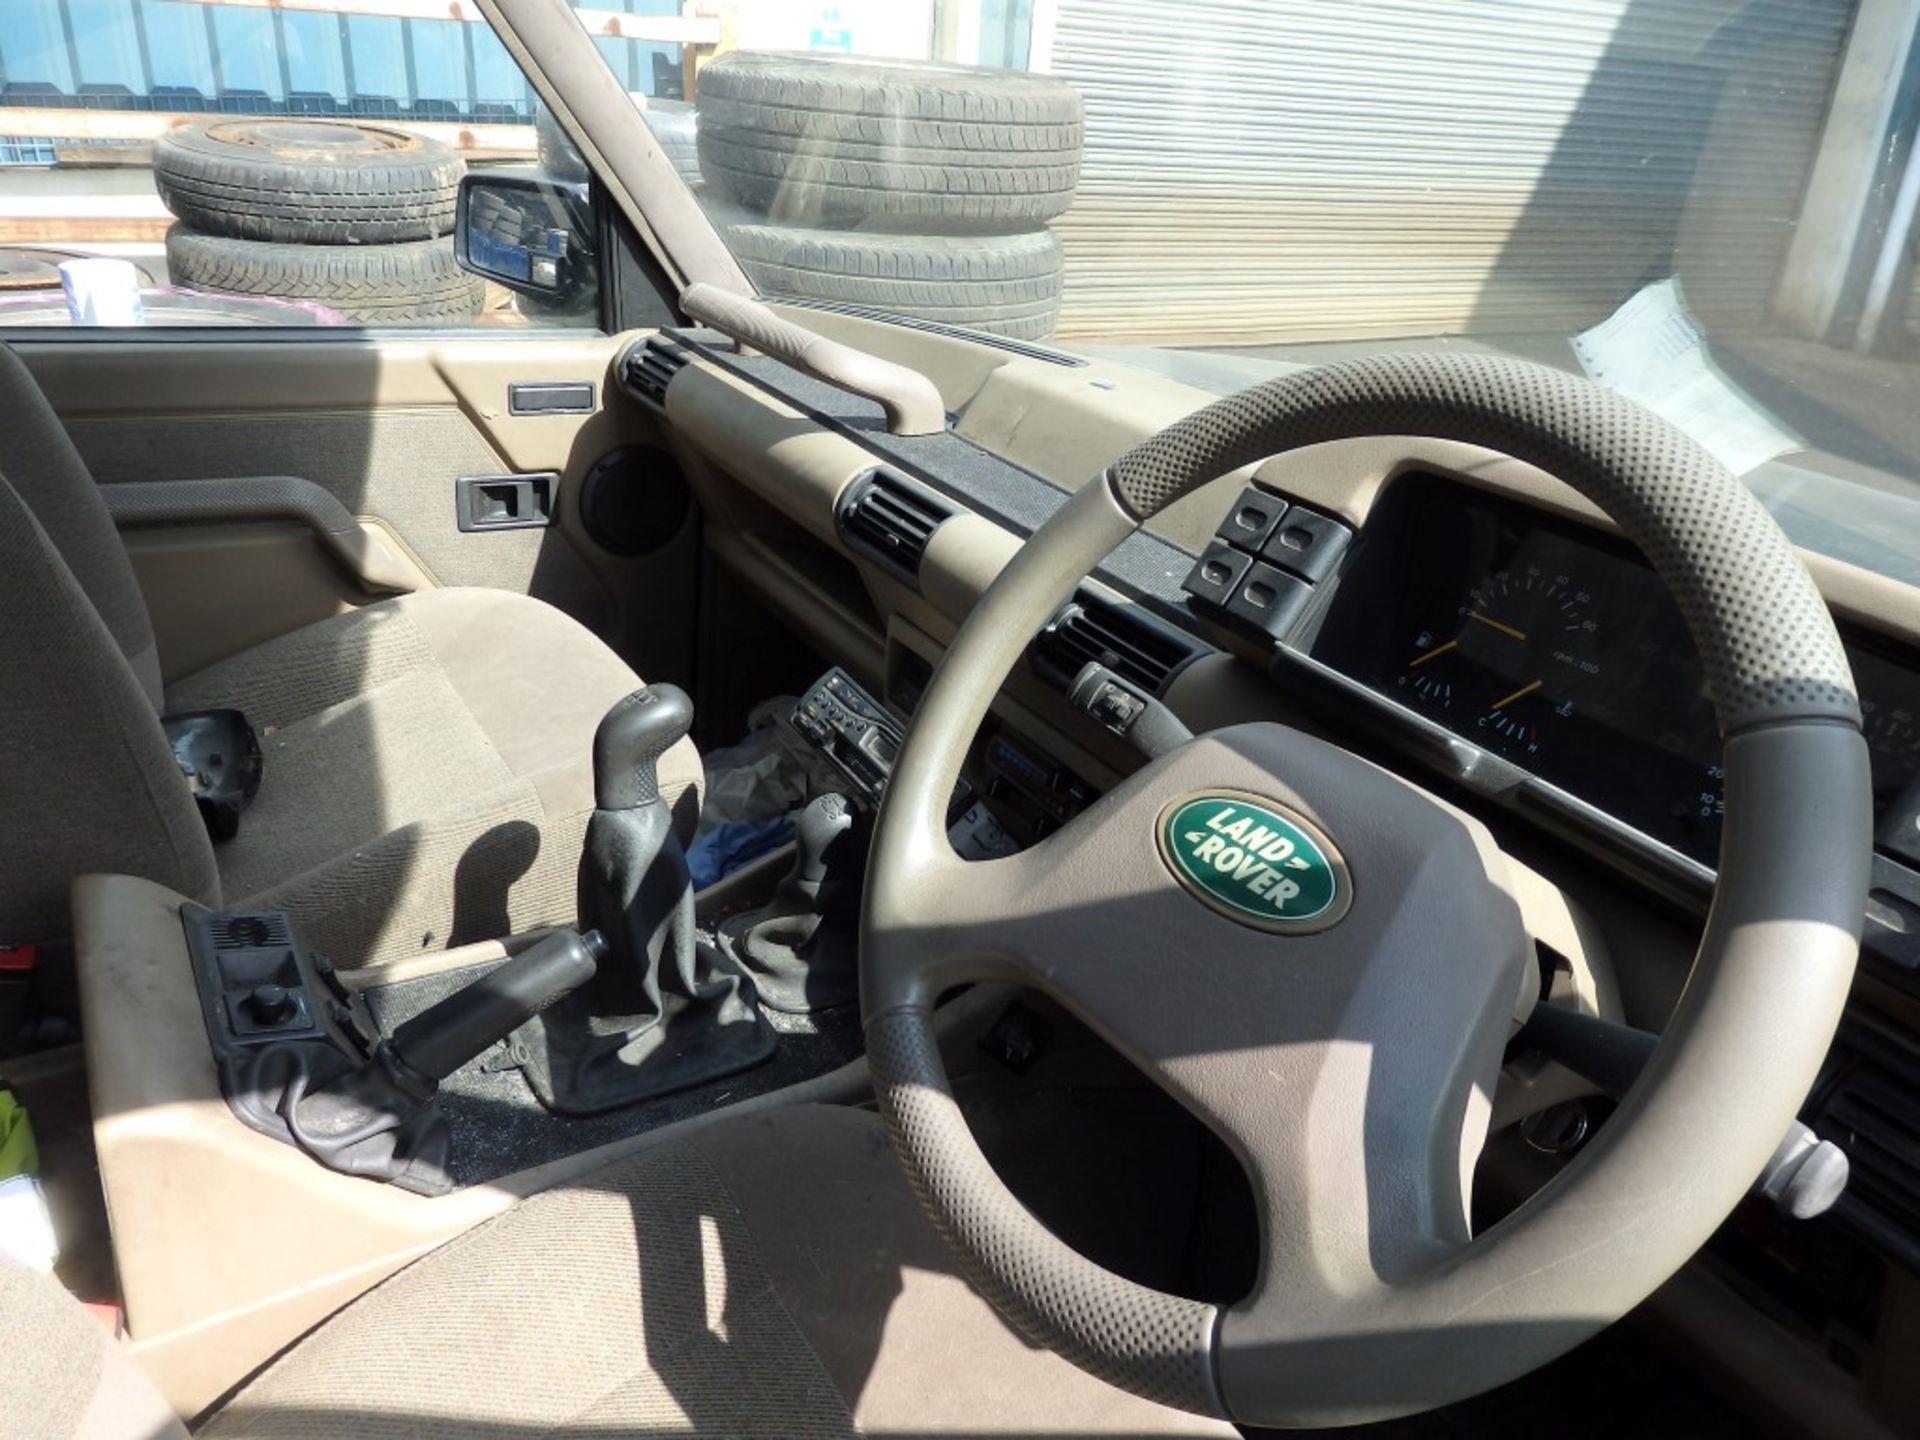 1 x Land Rover Discovery - Registration K755 GAC - Key In Ignition - Been Standing In Yard For 7 - Image 18 of 18